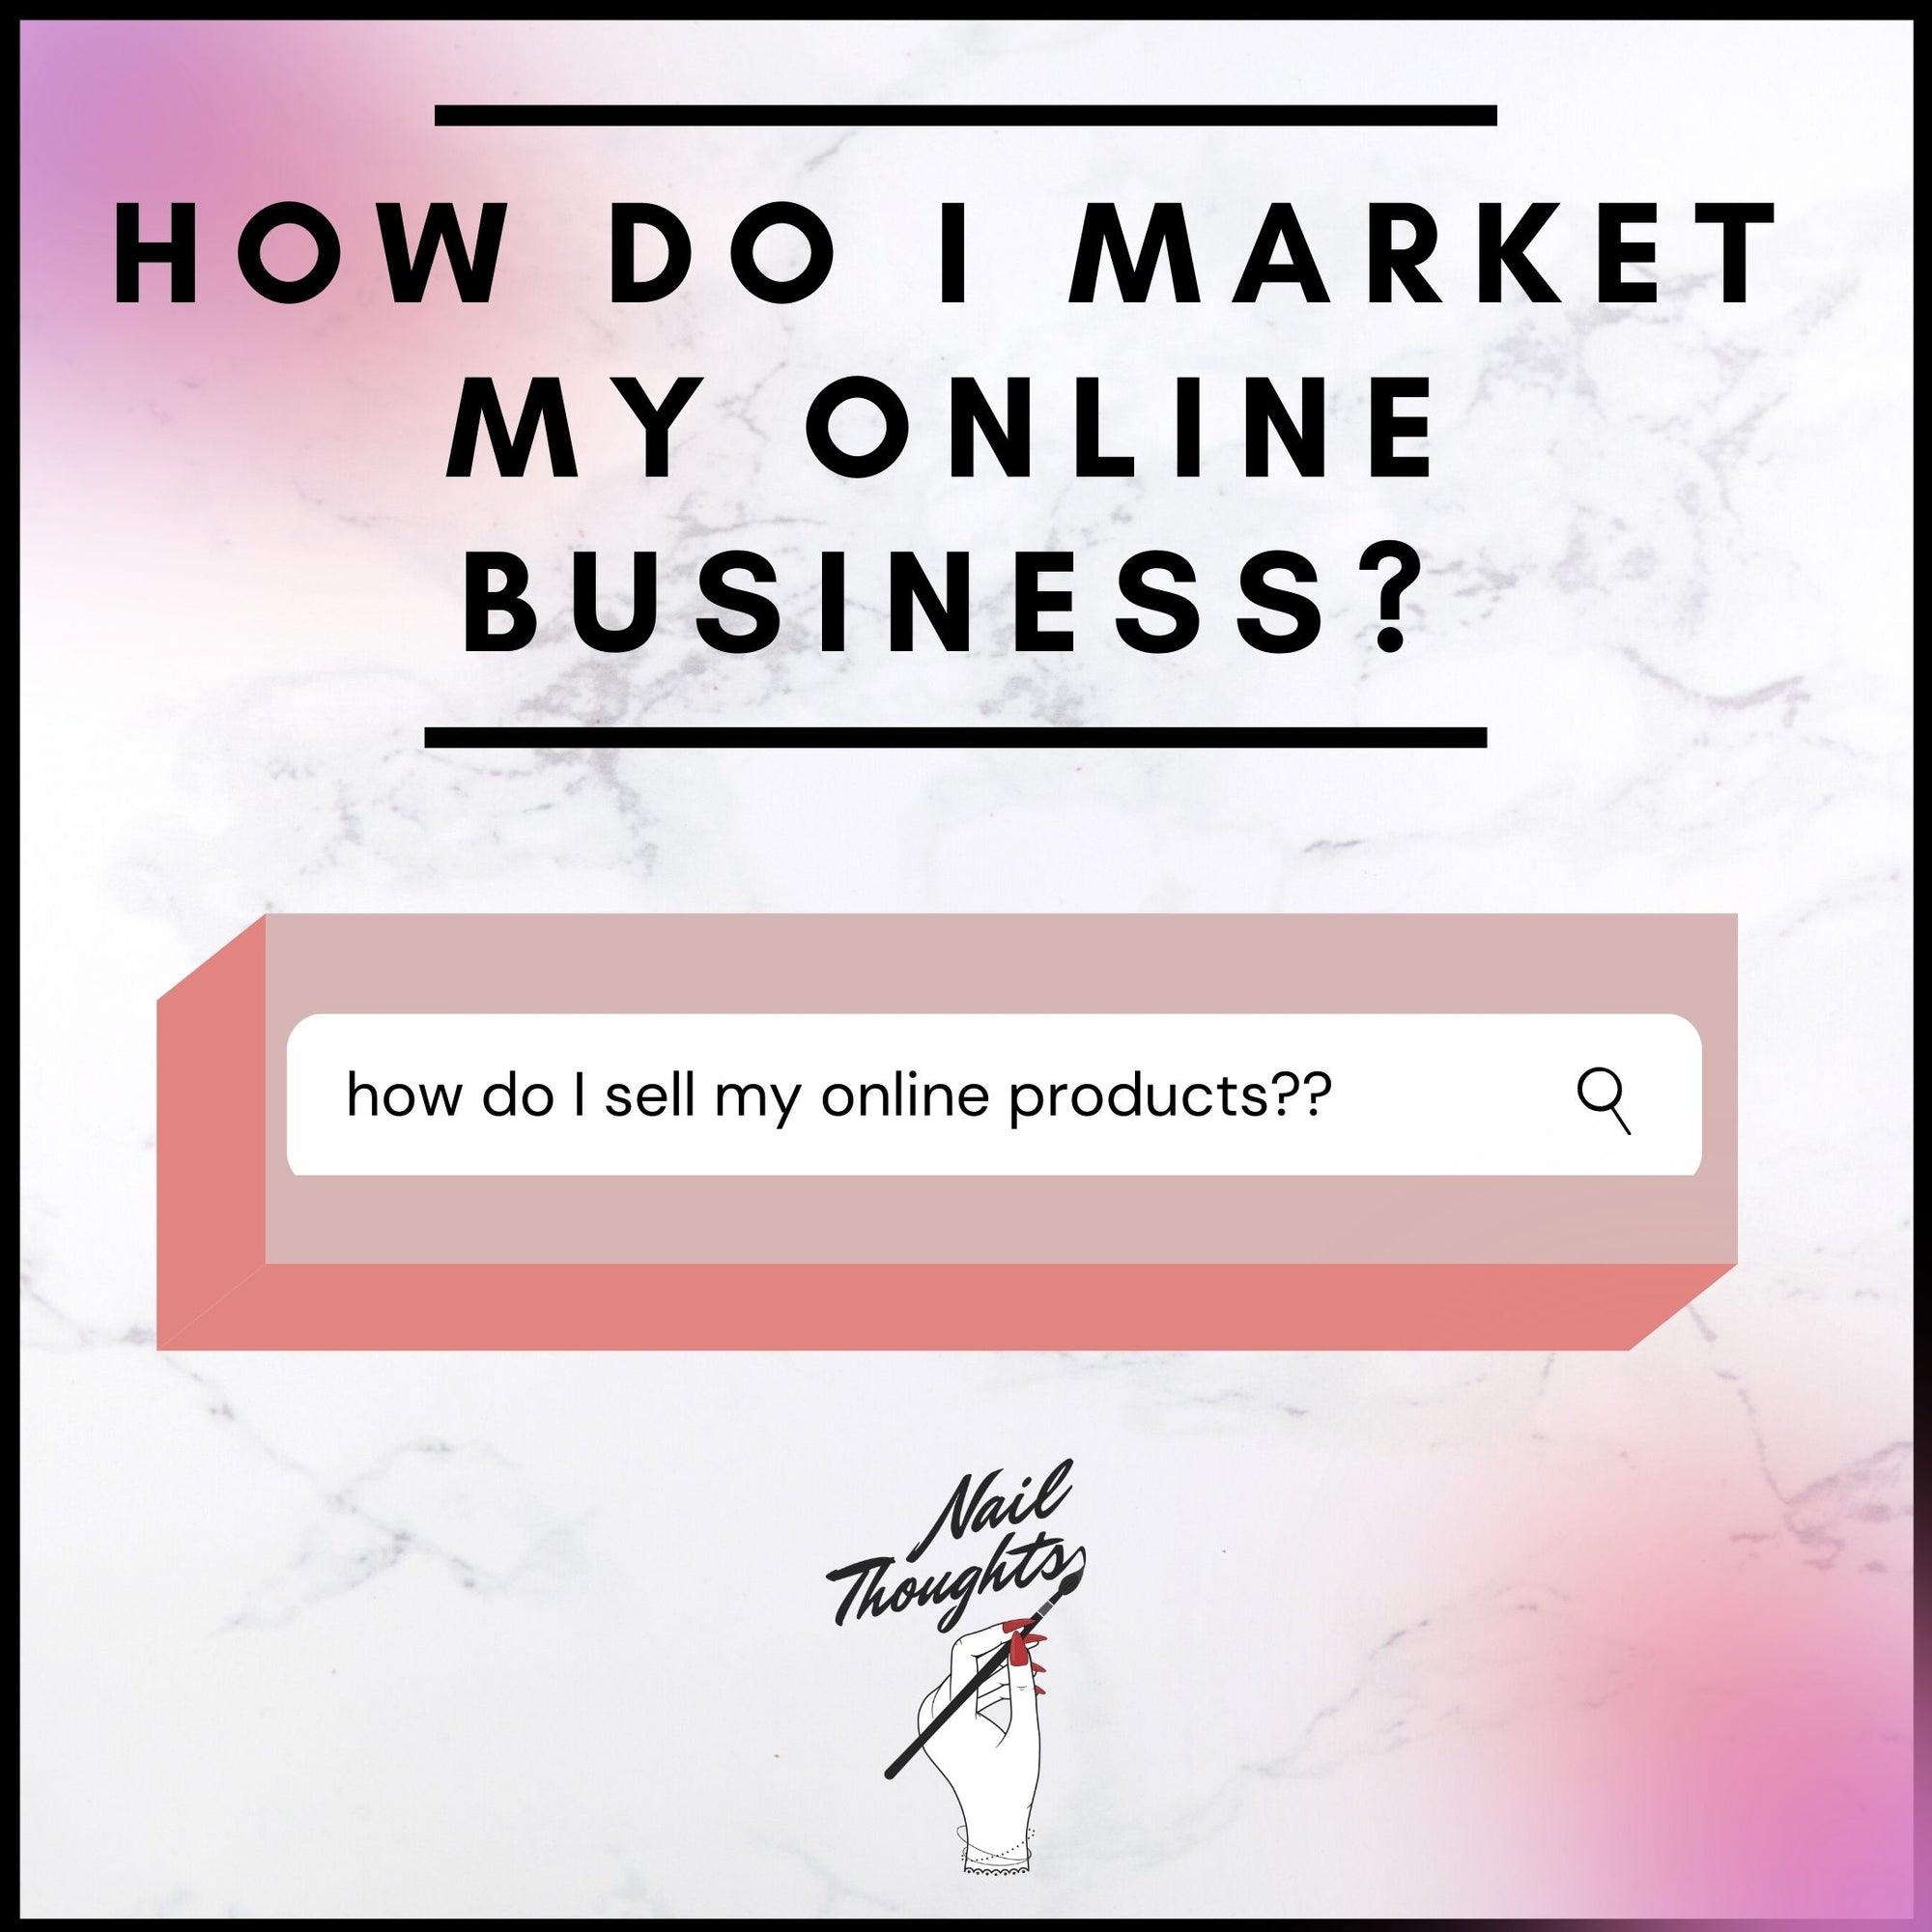 HOW TO MARKET YOUR ONLINE BUSINESS